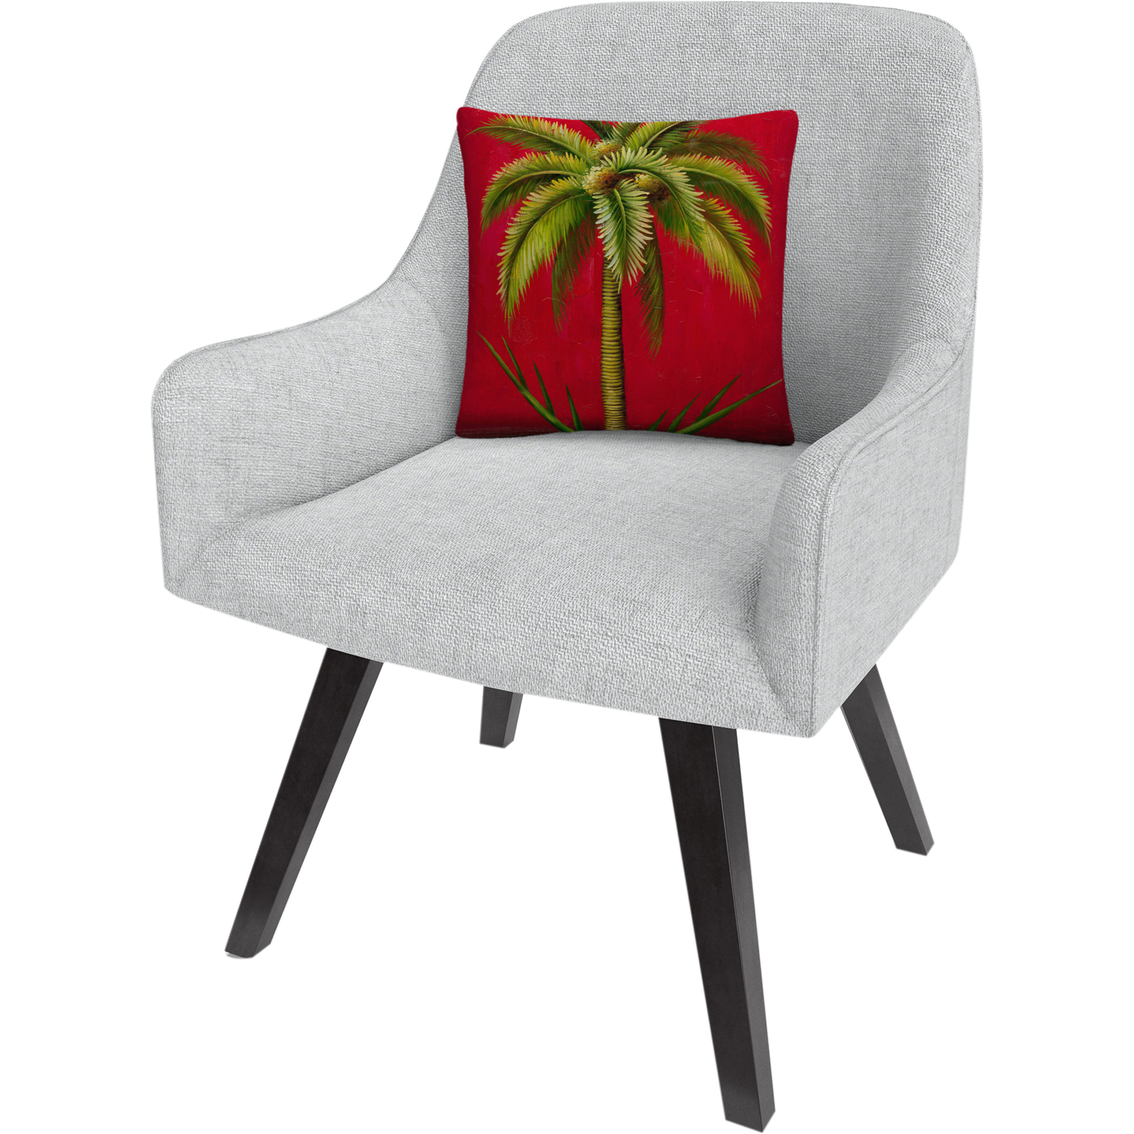 Trademark Fine Art Tropical Palm I Mid Century Red Decorative Throw Pillow - Image 2 of 2